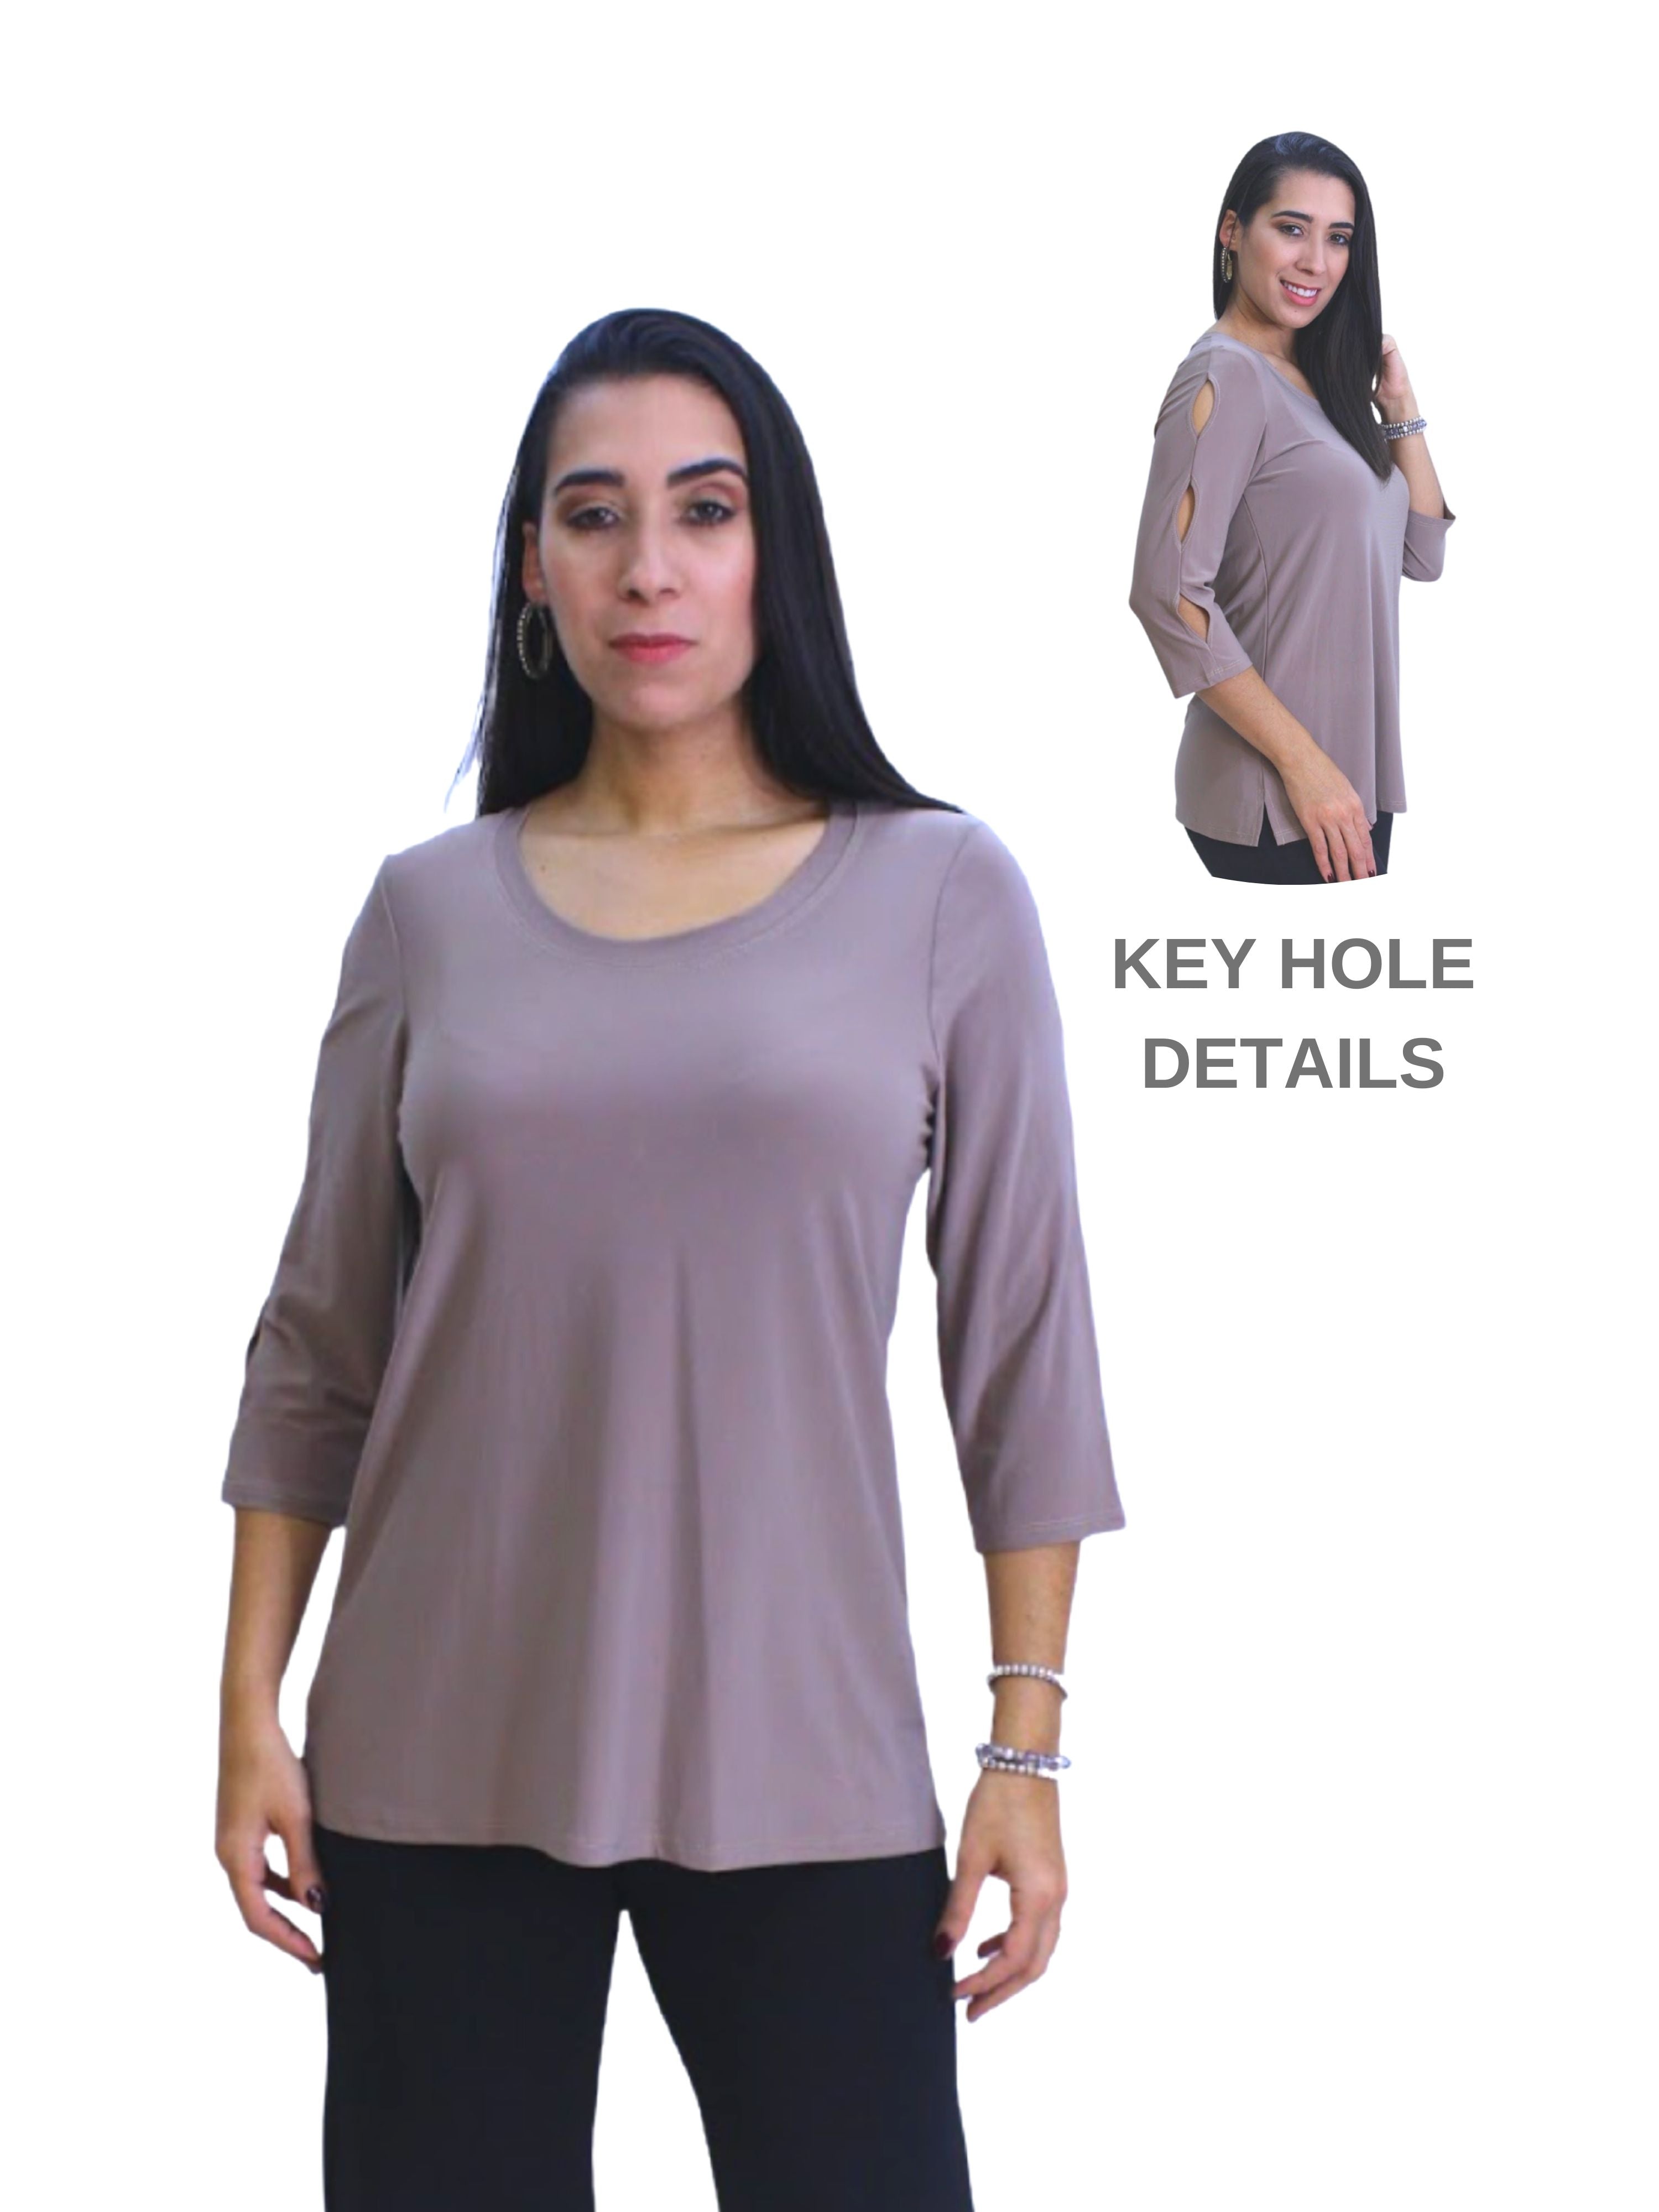 FASHQUE - Top with 3 KEY hole details on the sleeves - T430 SALE